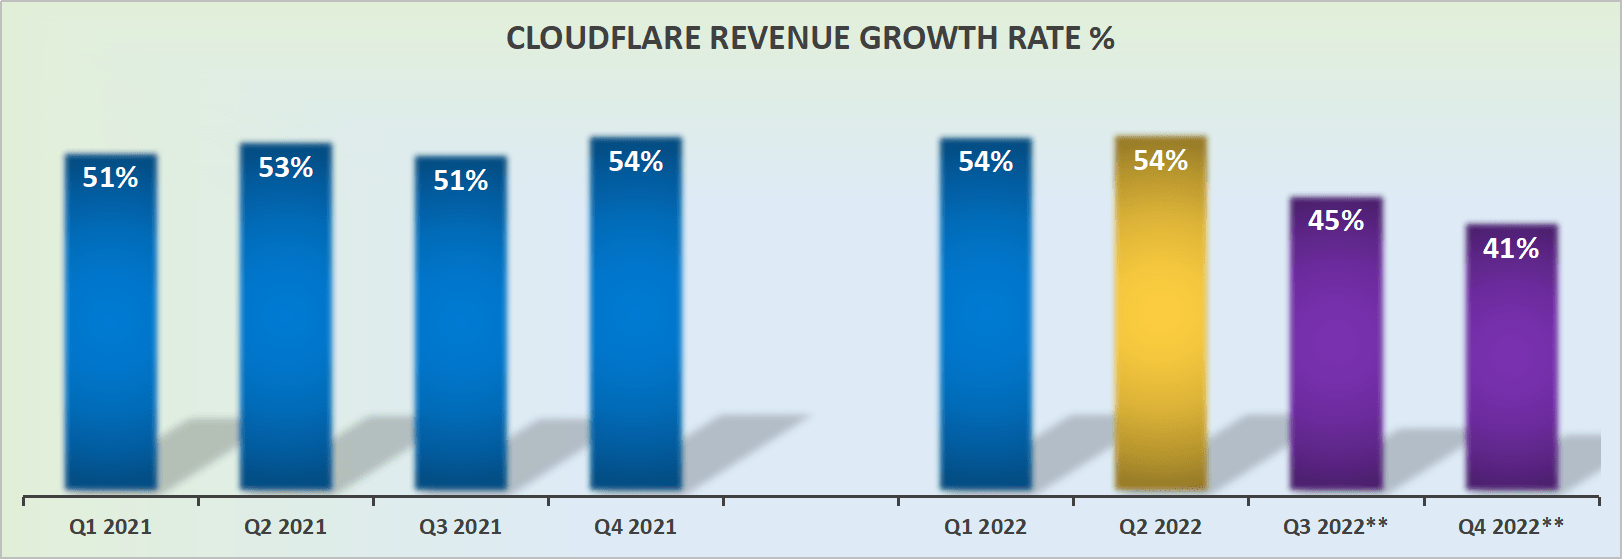 Cloudflare's revenue growth rates